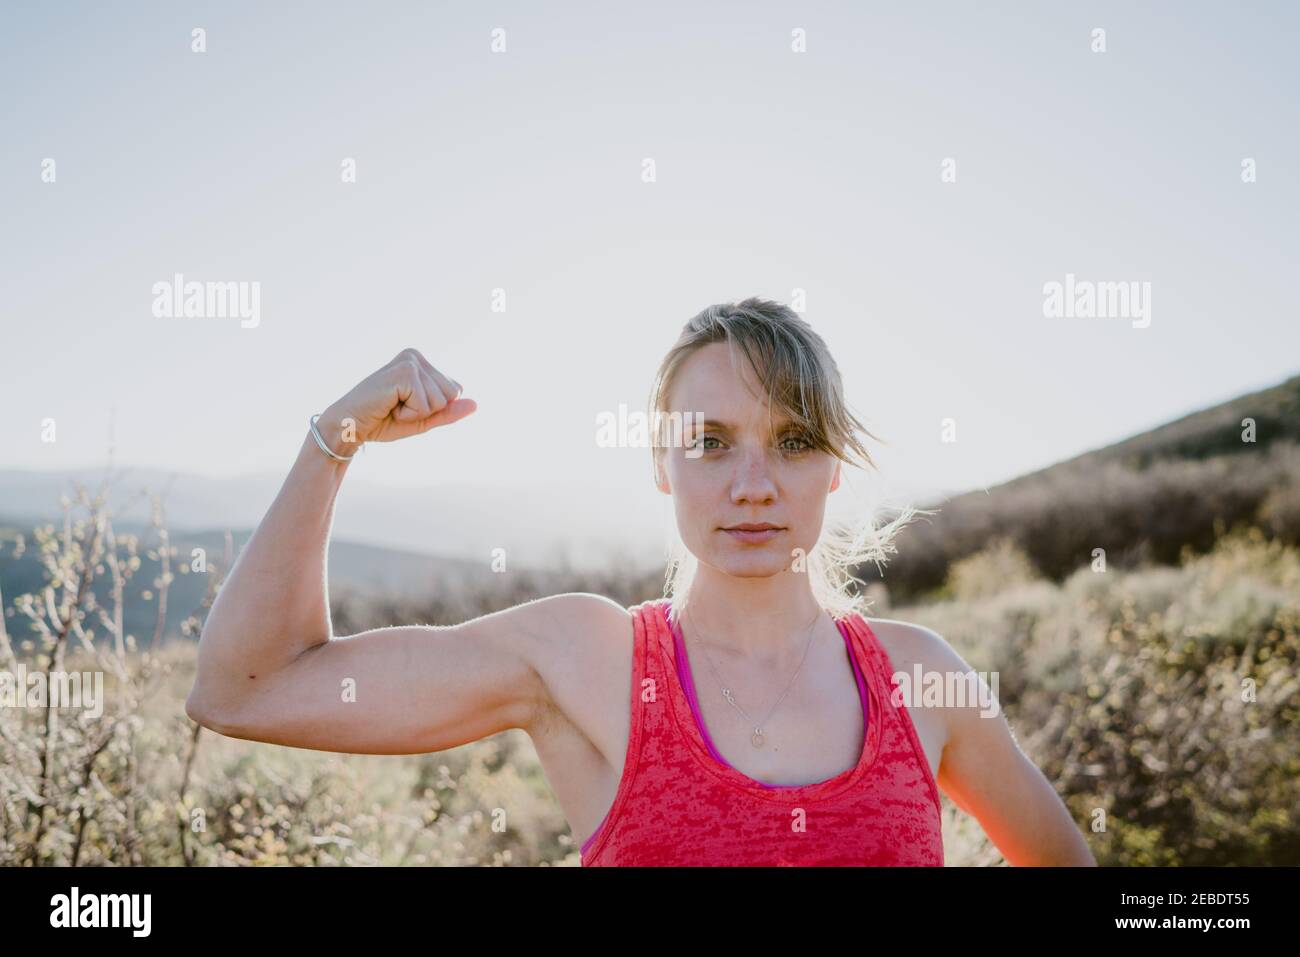 Athletic blonde woman flexes muscles with sun and mountains behind Stock Photo